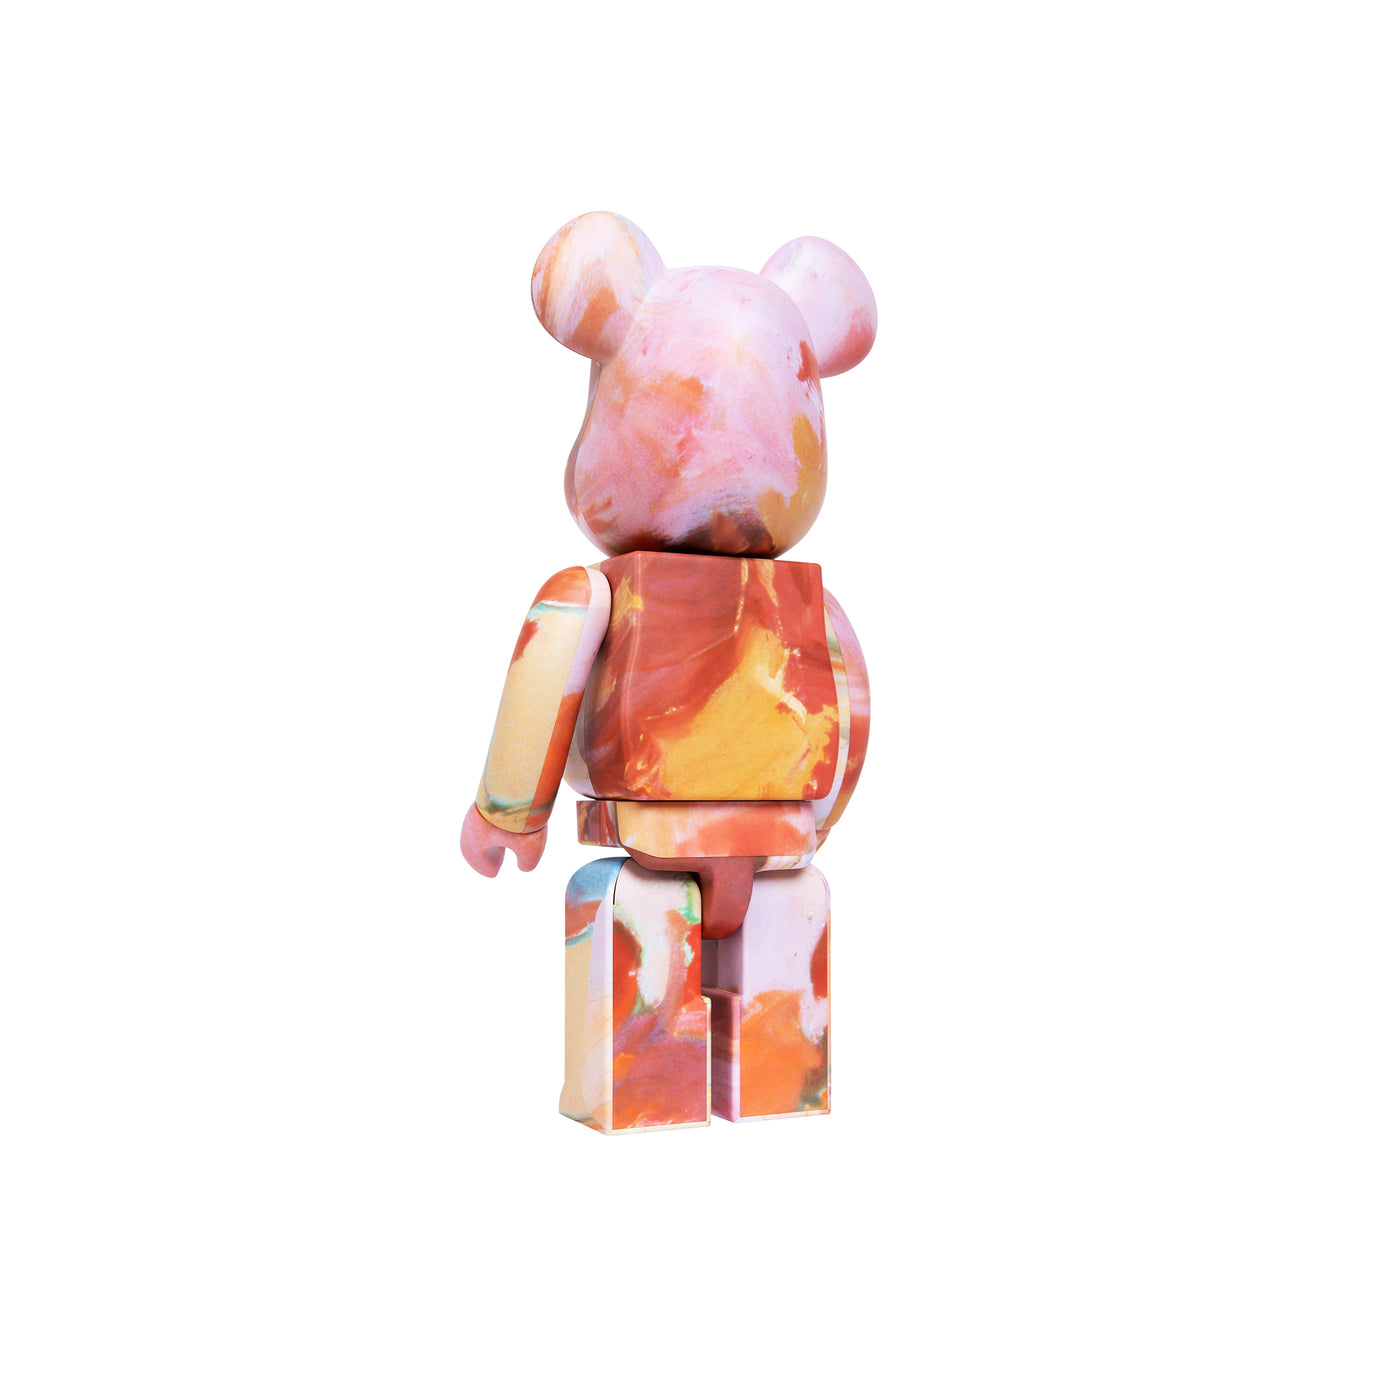 BE@RBRICK Nujabes “FIRST COLLECTION”